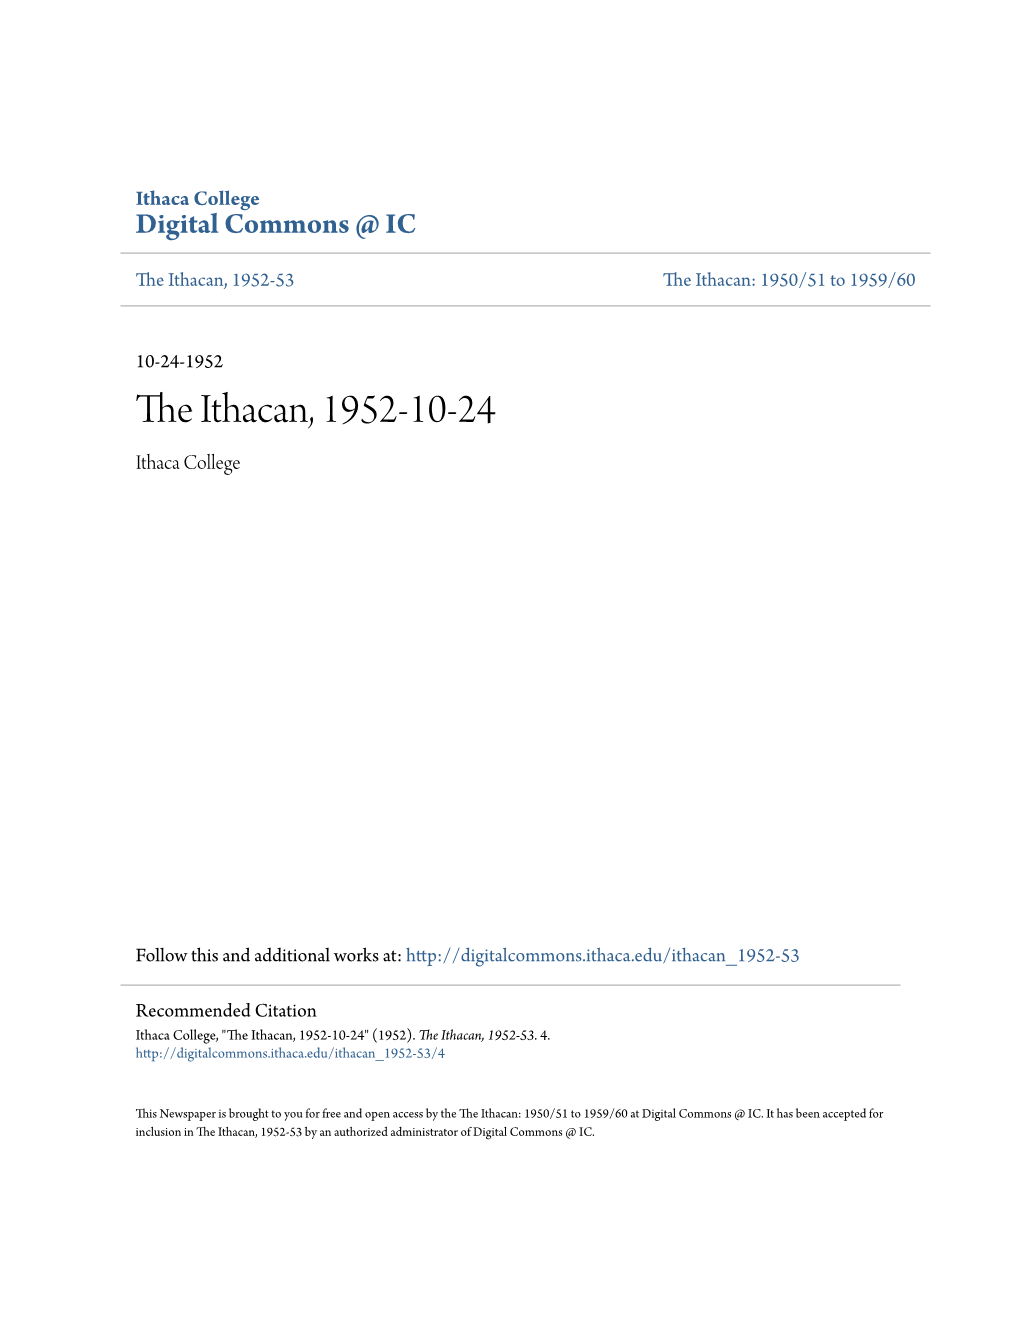 The Ithacan, 1952-10-24